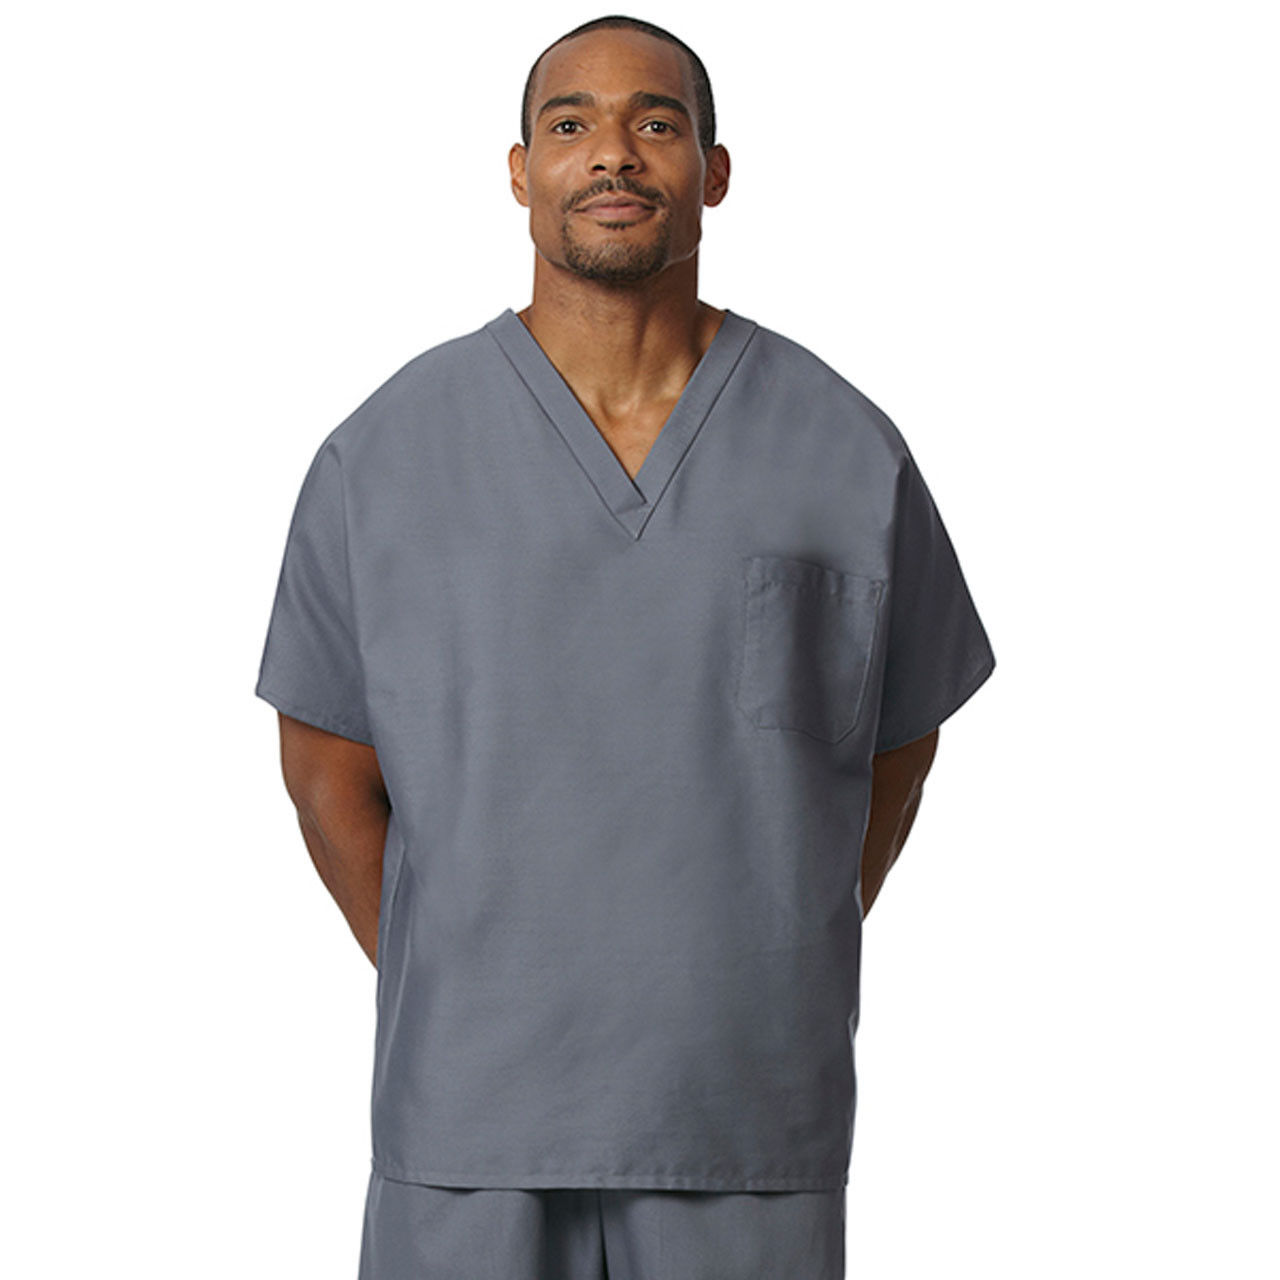 What is the design of the neck on the Gray Scrub Tops?